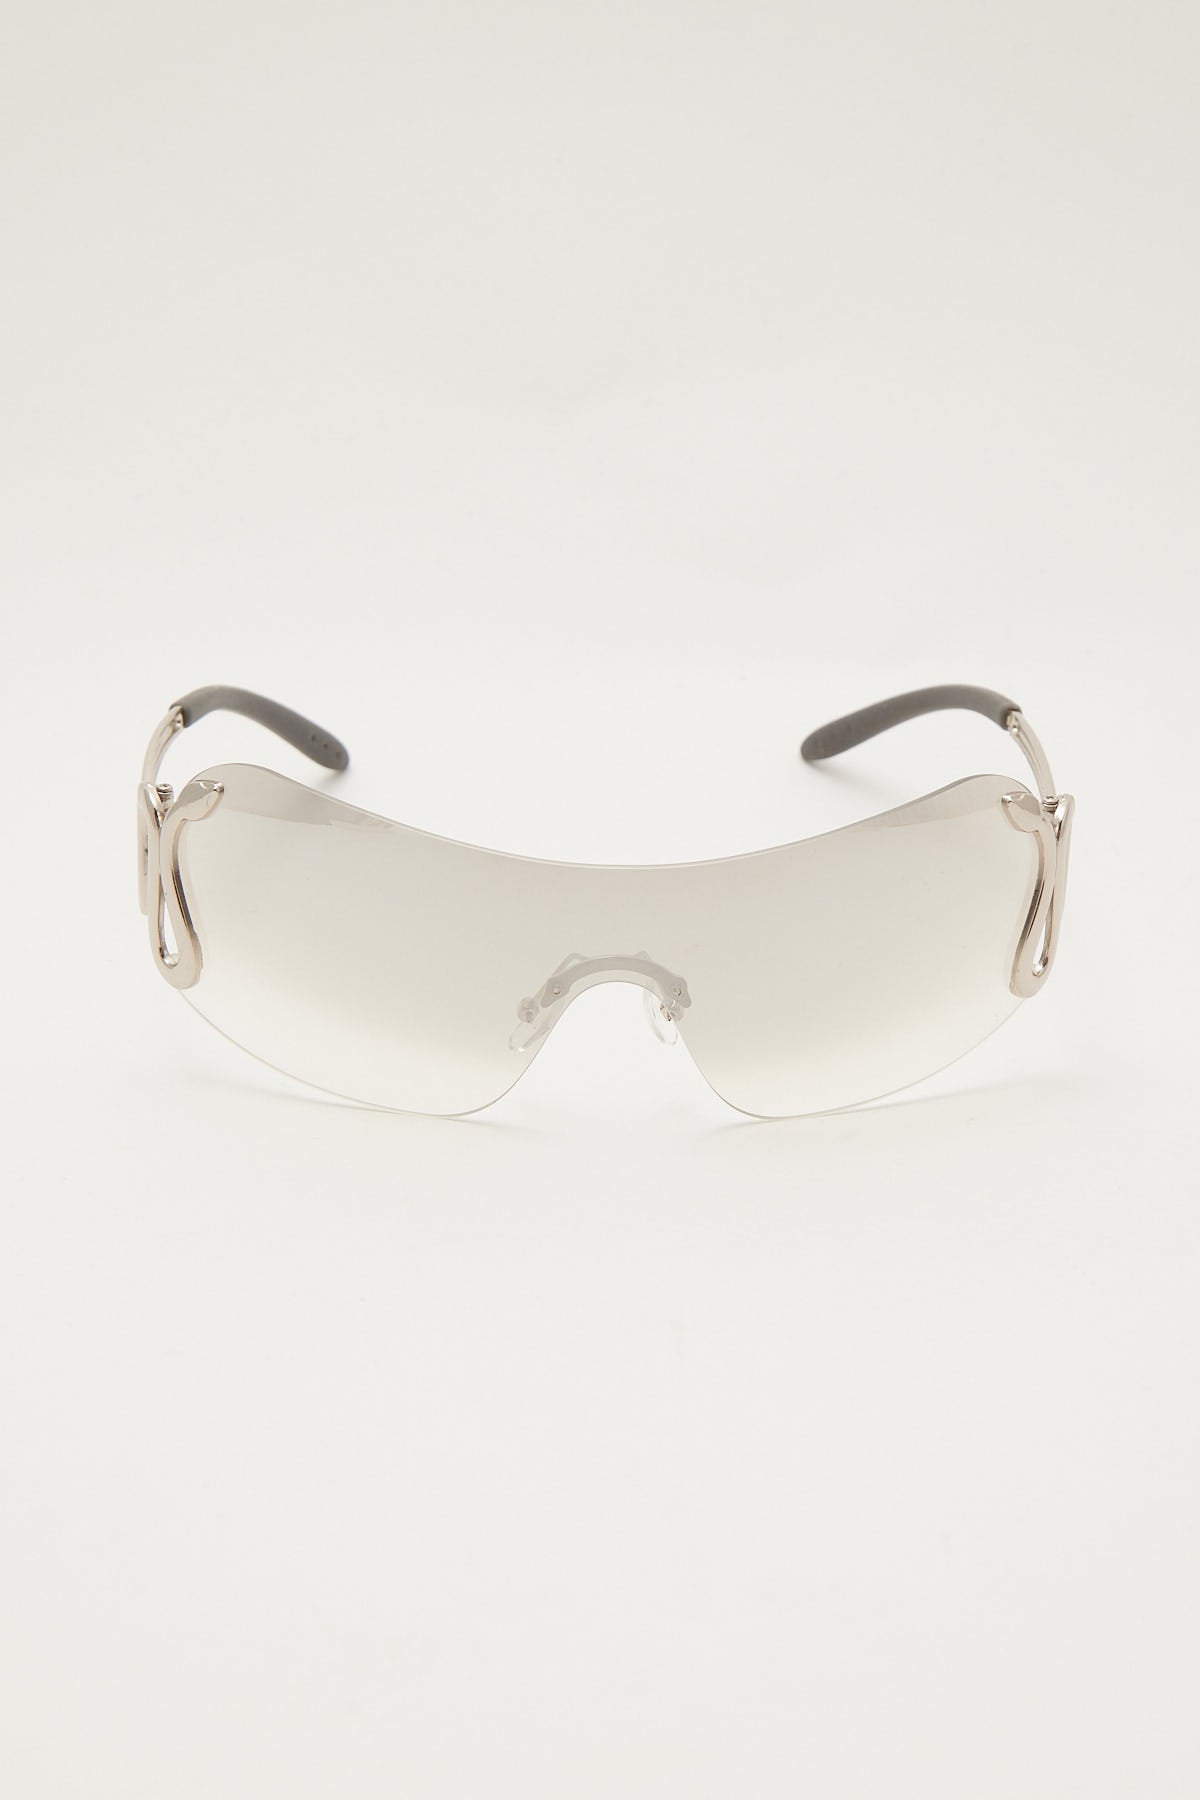 Angels Whisper Crystal Clear Sunglasses Clear